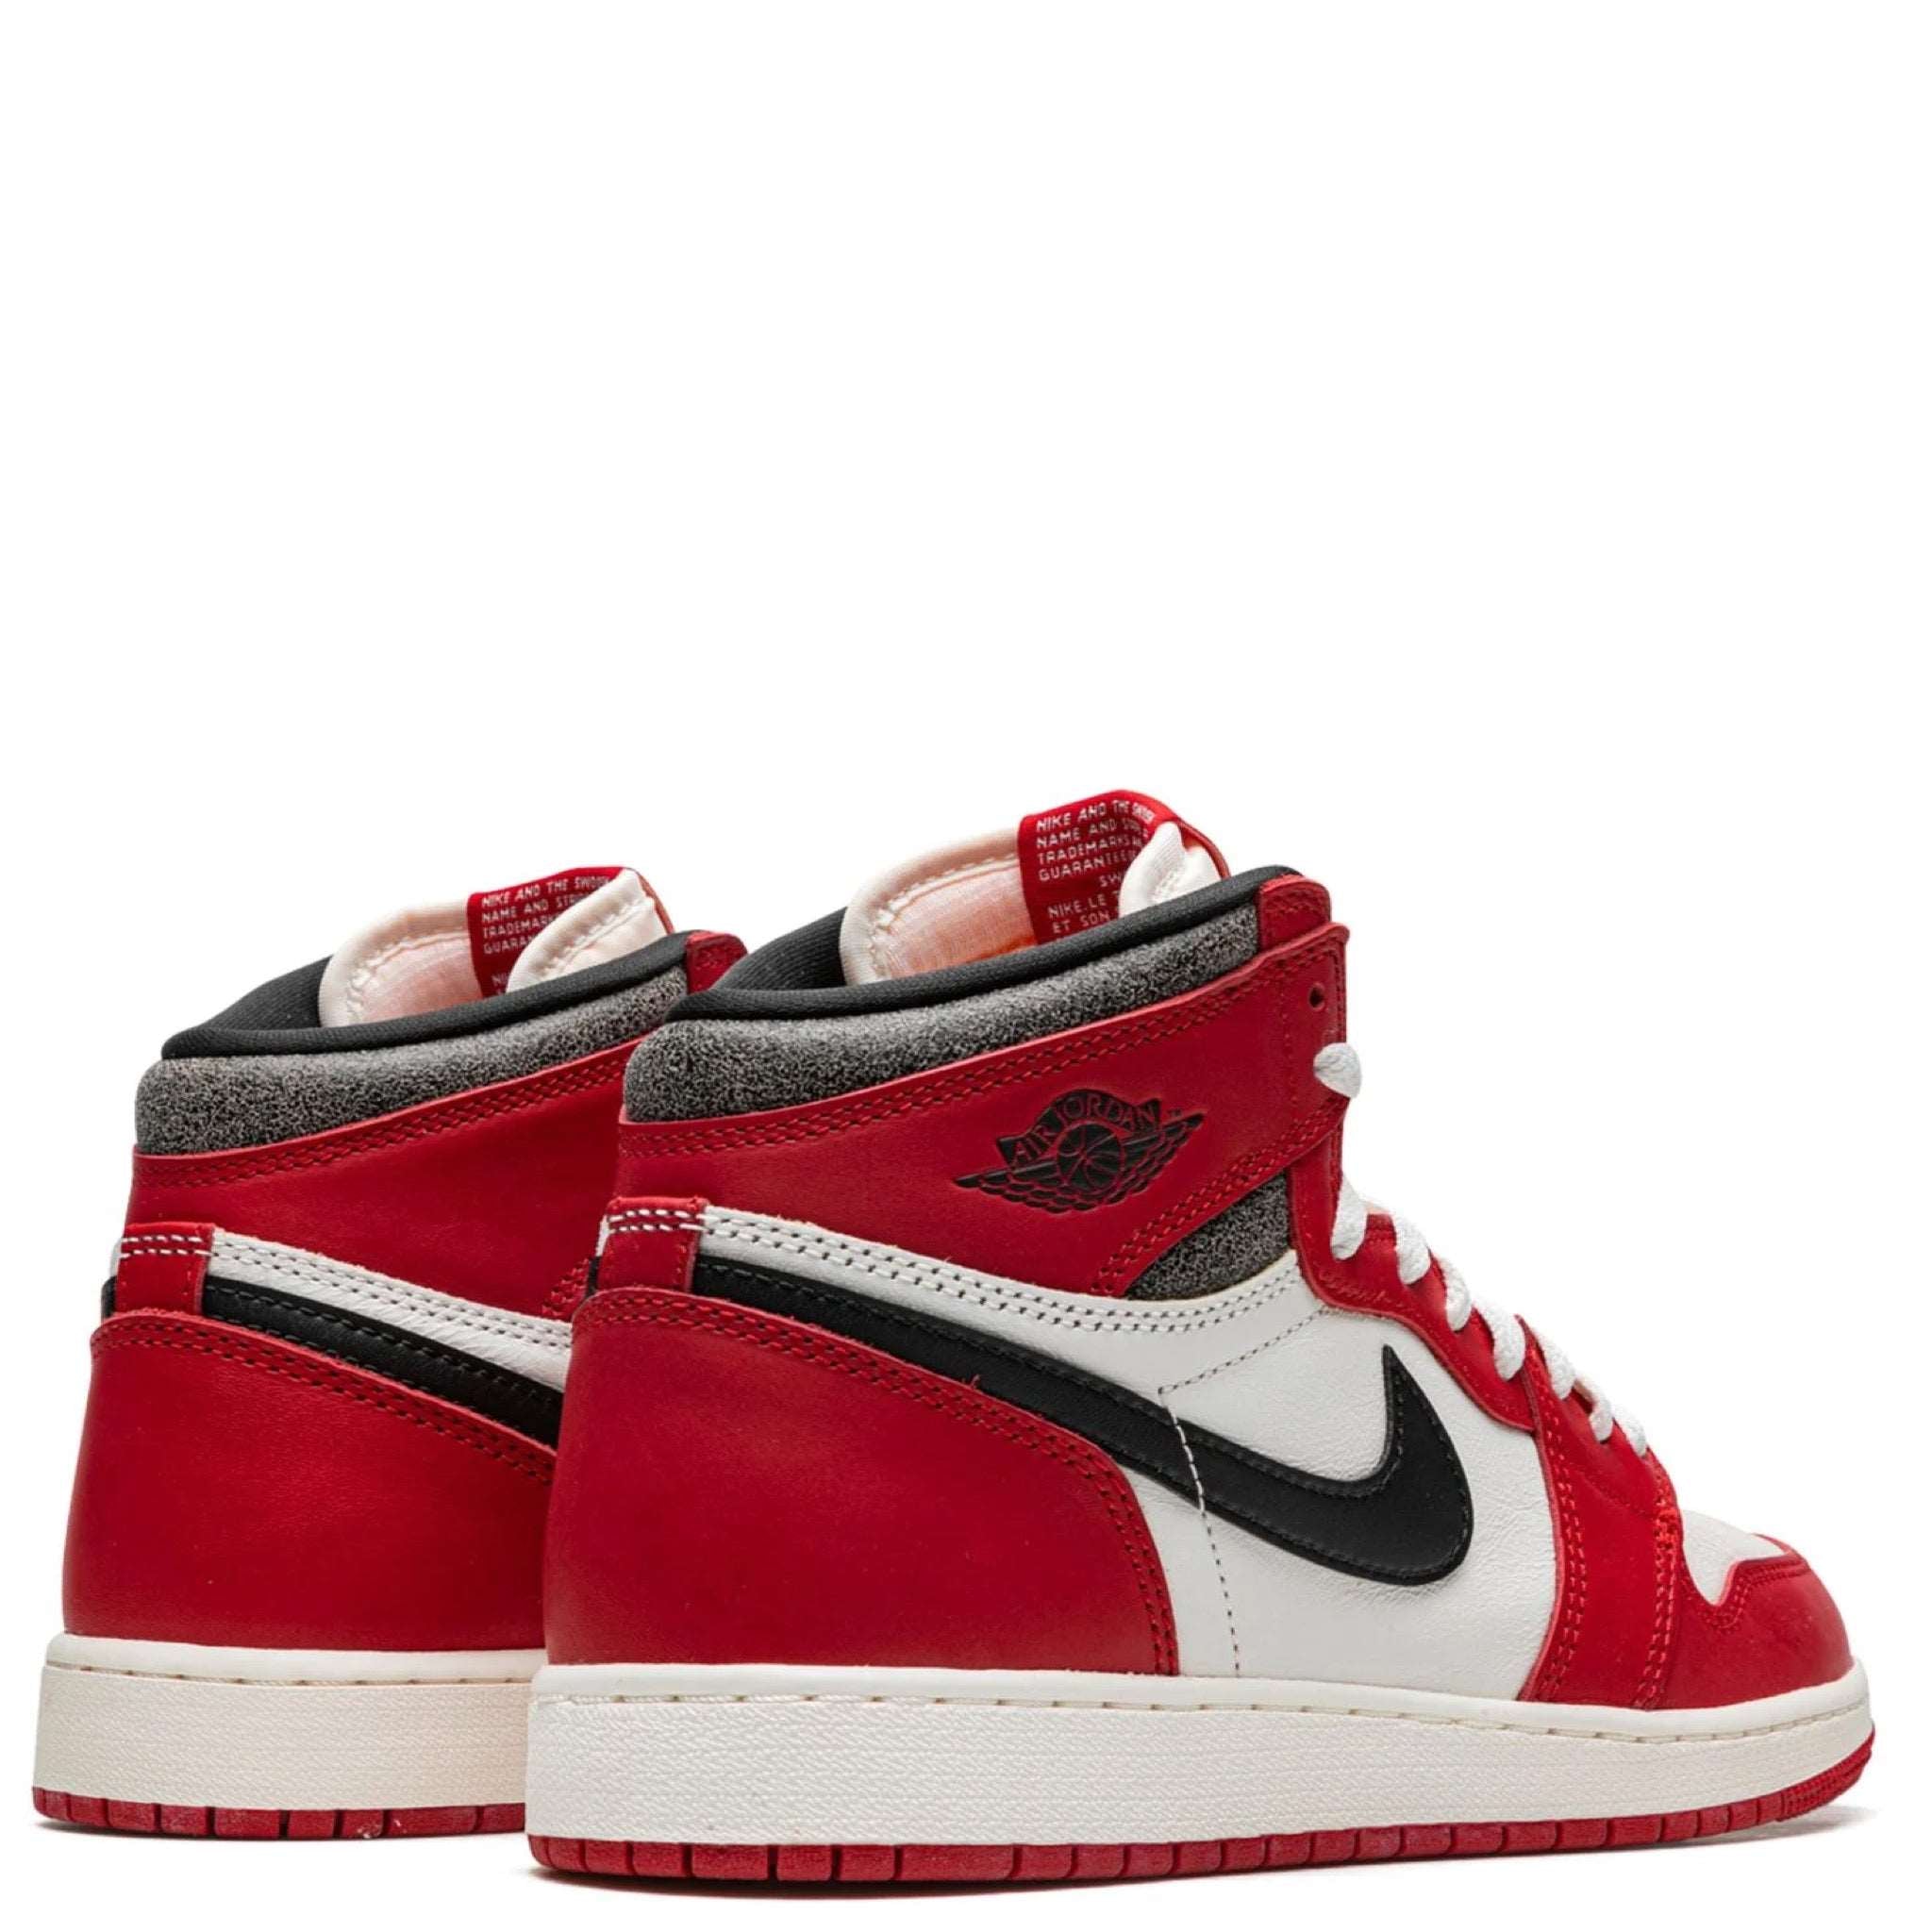 AIR JORDAN 1 RETRO HIGH CHICAGO LOST AND FOUND (GS)